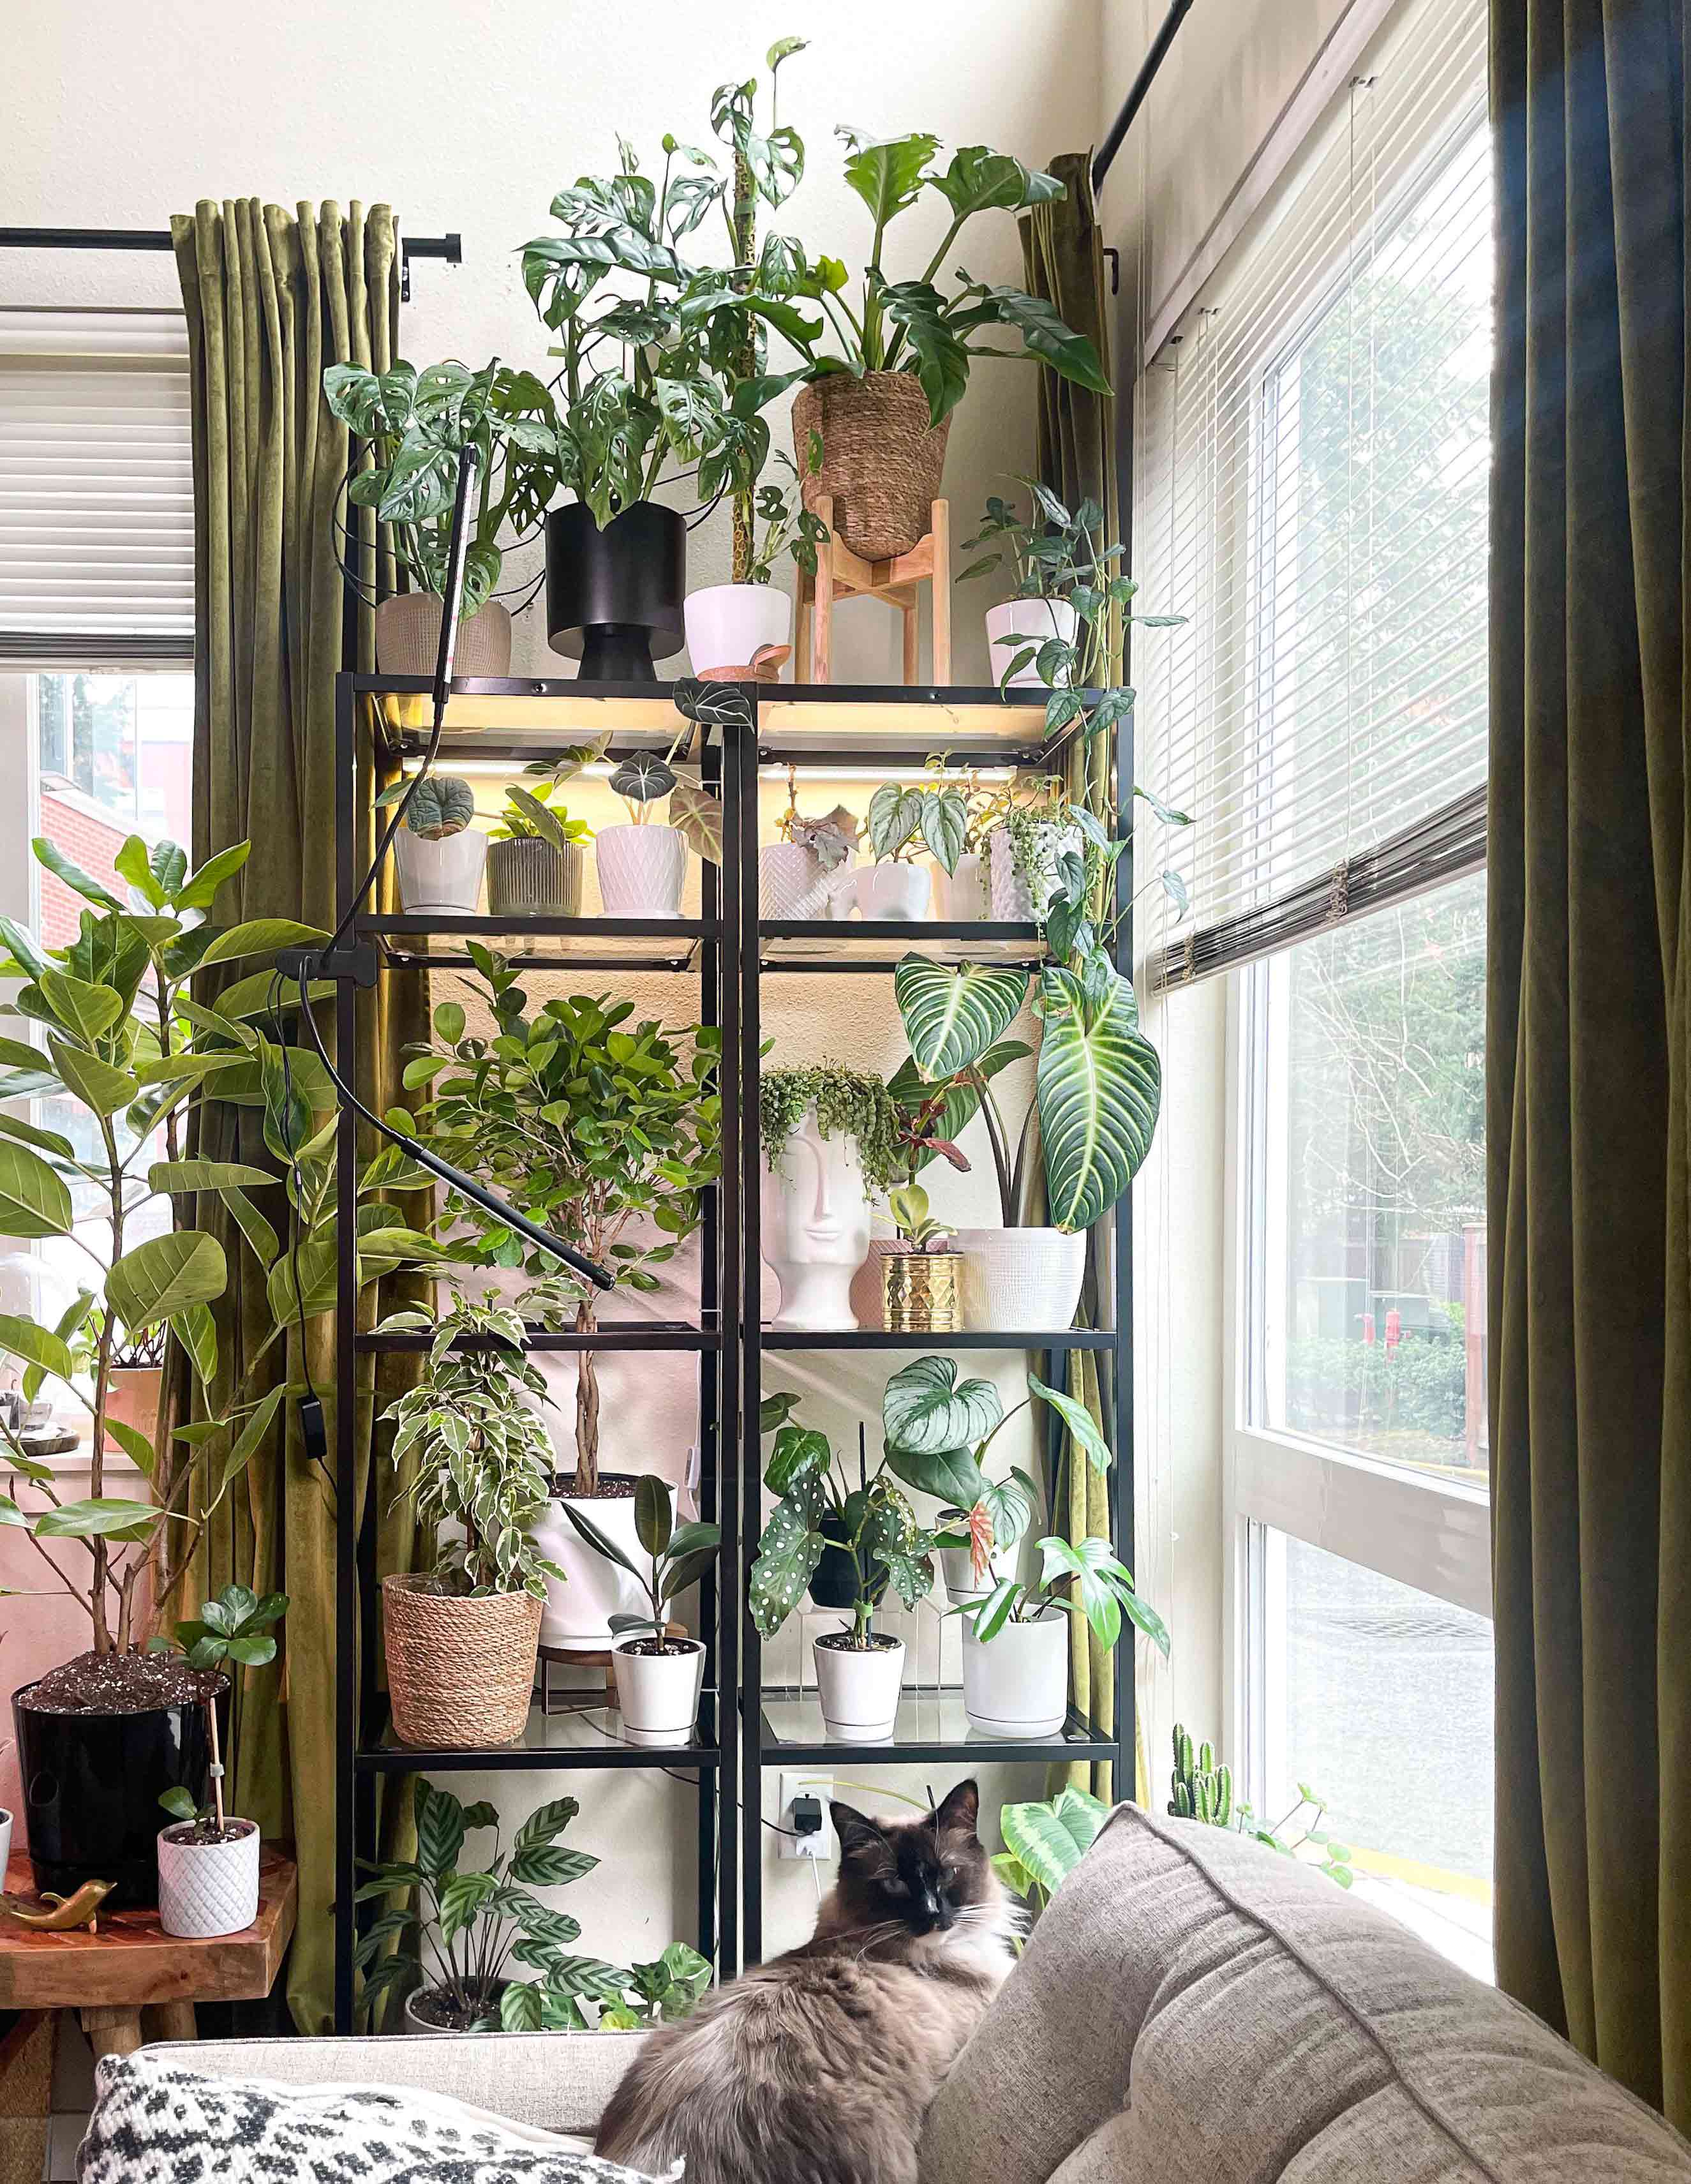 A plant display and a cat on the sofa